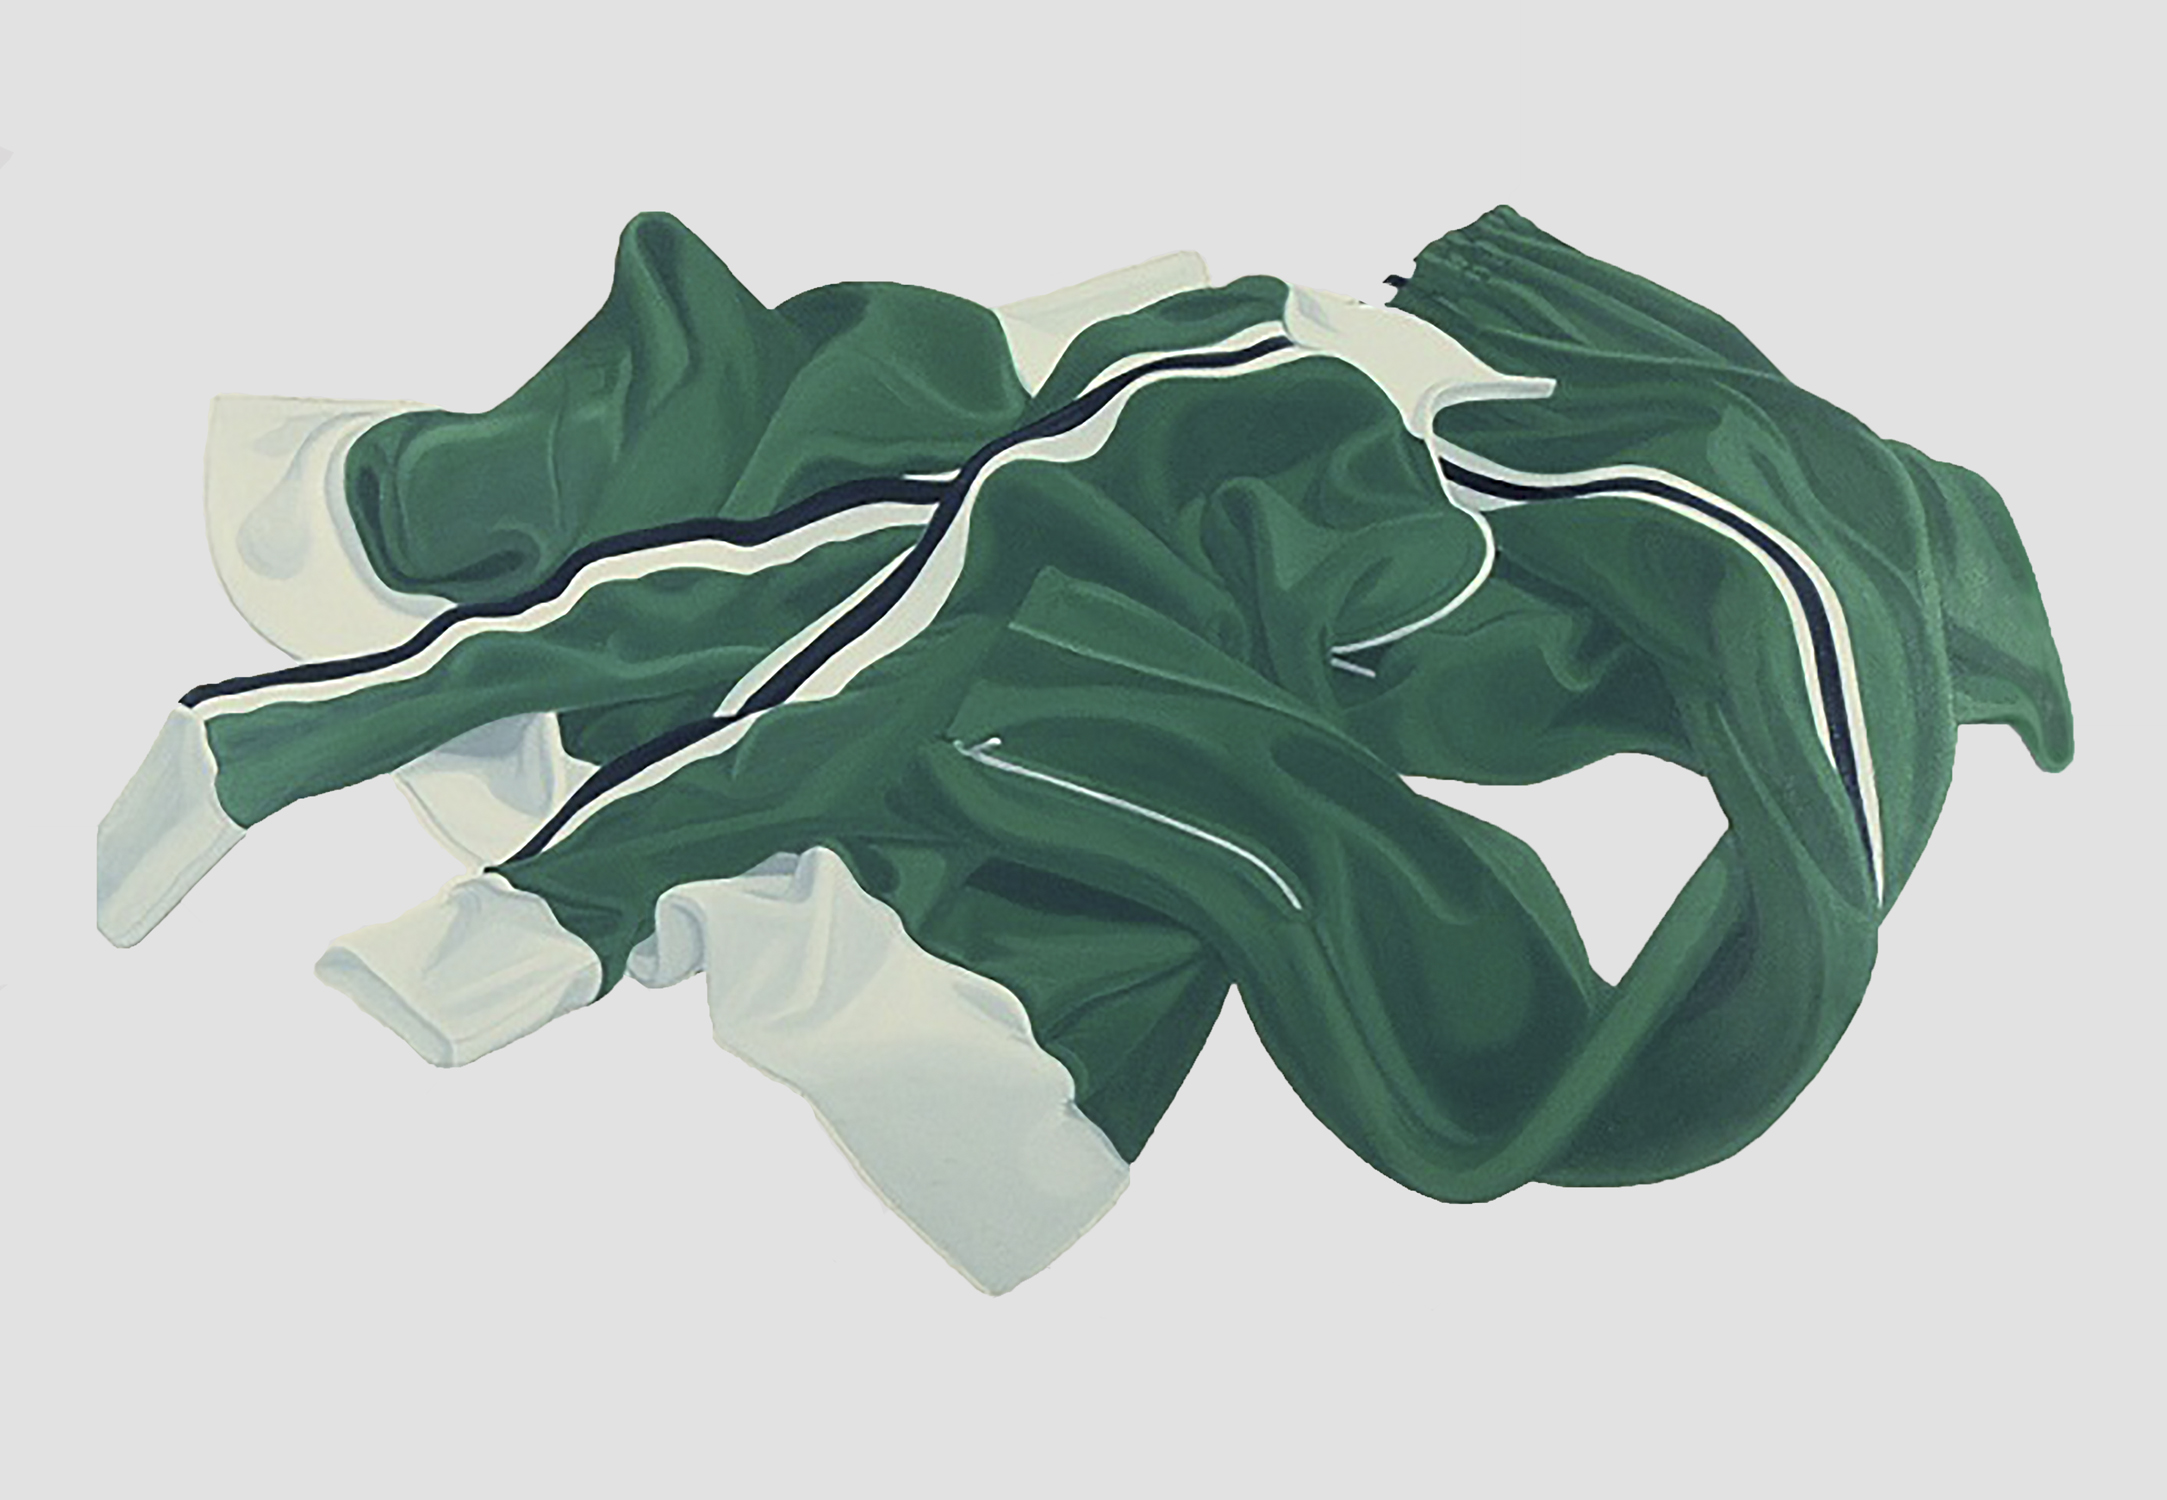  Green Warm-Up Suit, 72 x 42”, 1974 